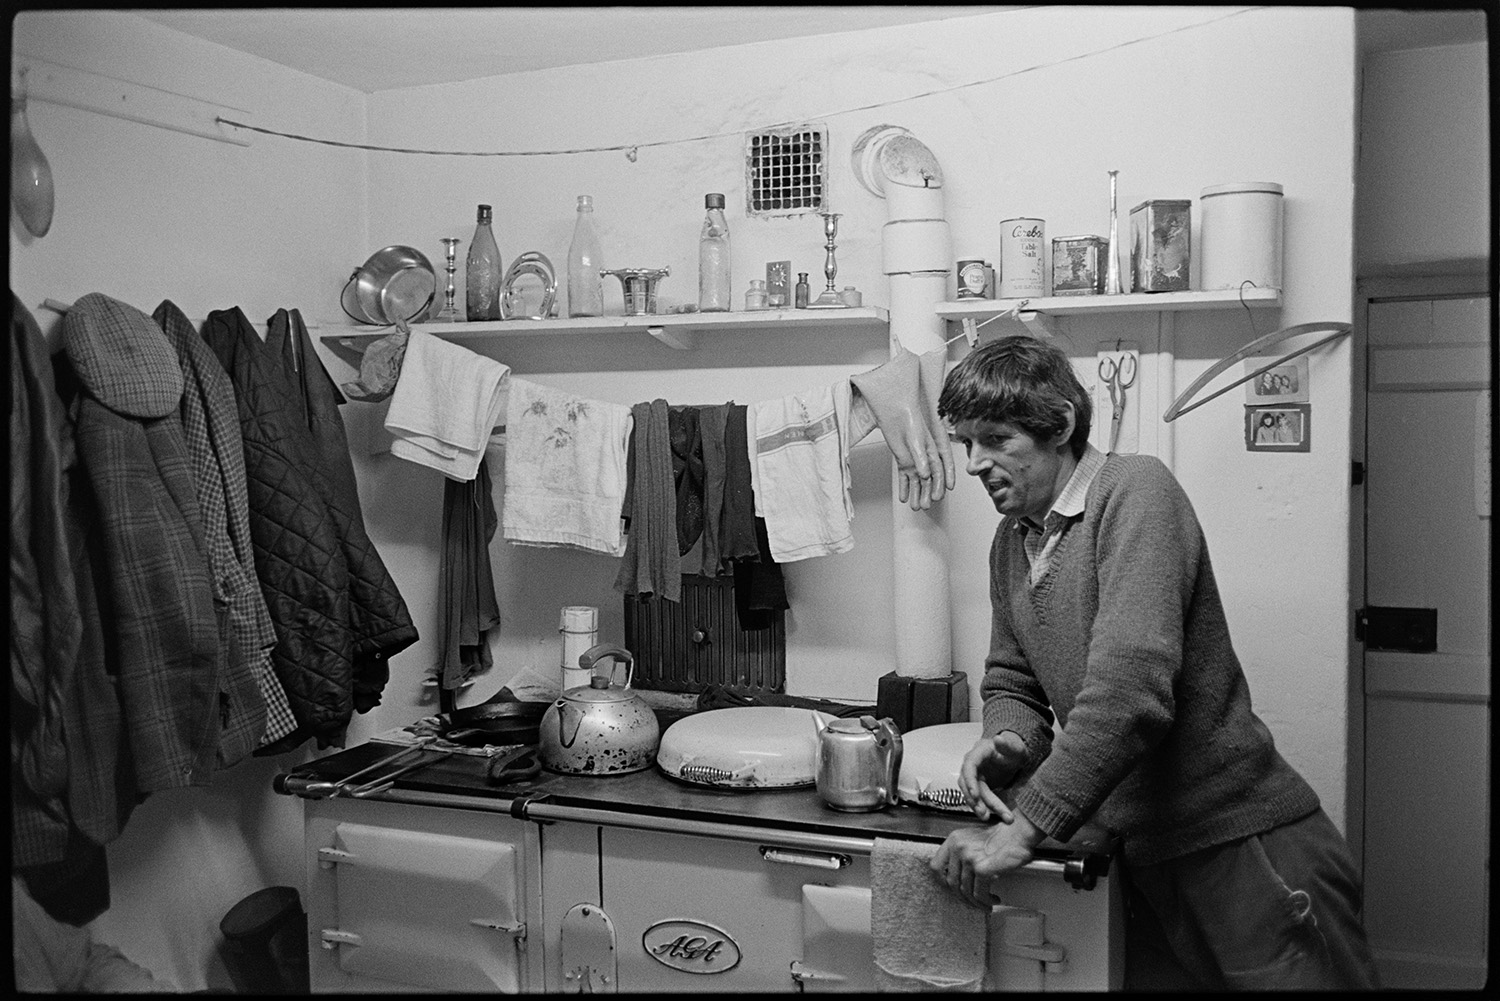 Man leaning on stove, kettle, teapot, cloths drying, mantelpiece. 
[A man leaning on a Aga at Exmoor Farm. Kettles are on the stove and tea towels are hung up to dry above the stove. Coats are hung up on the wall and a mantelpiece above the stove has various ornaments, including candlesticks and tins, on display.]